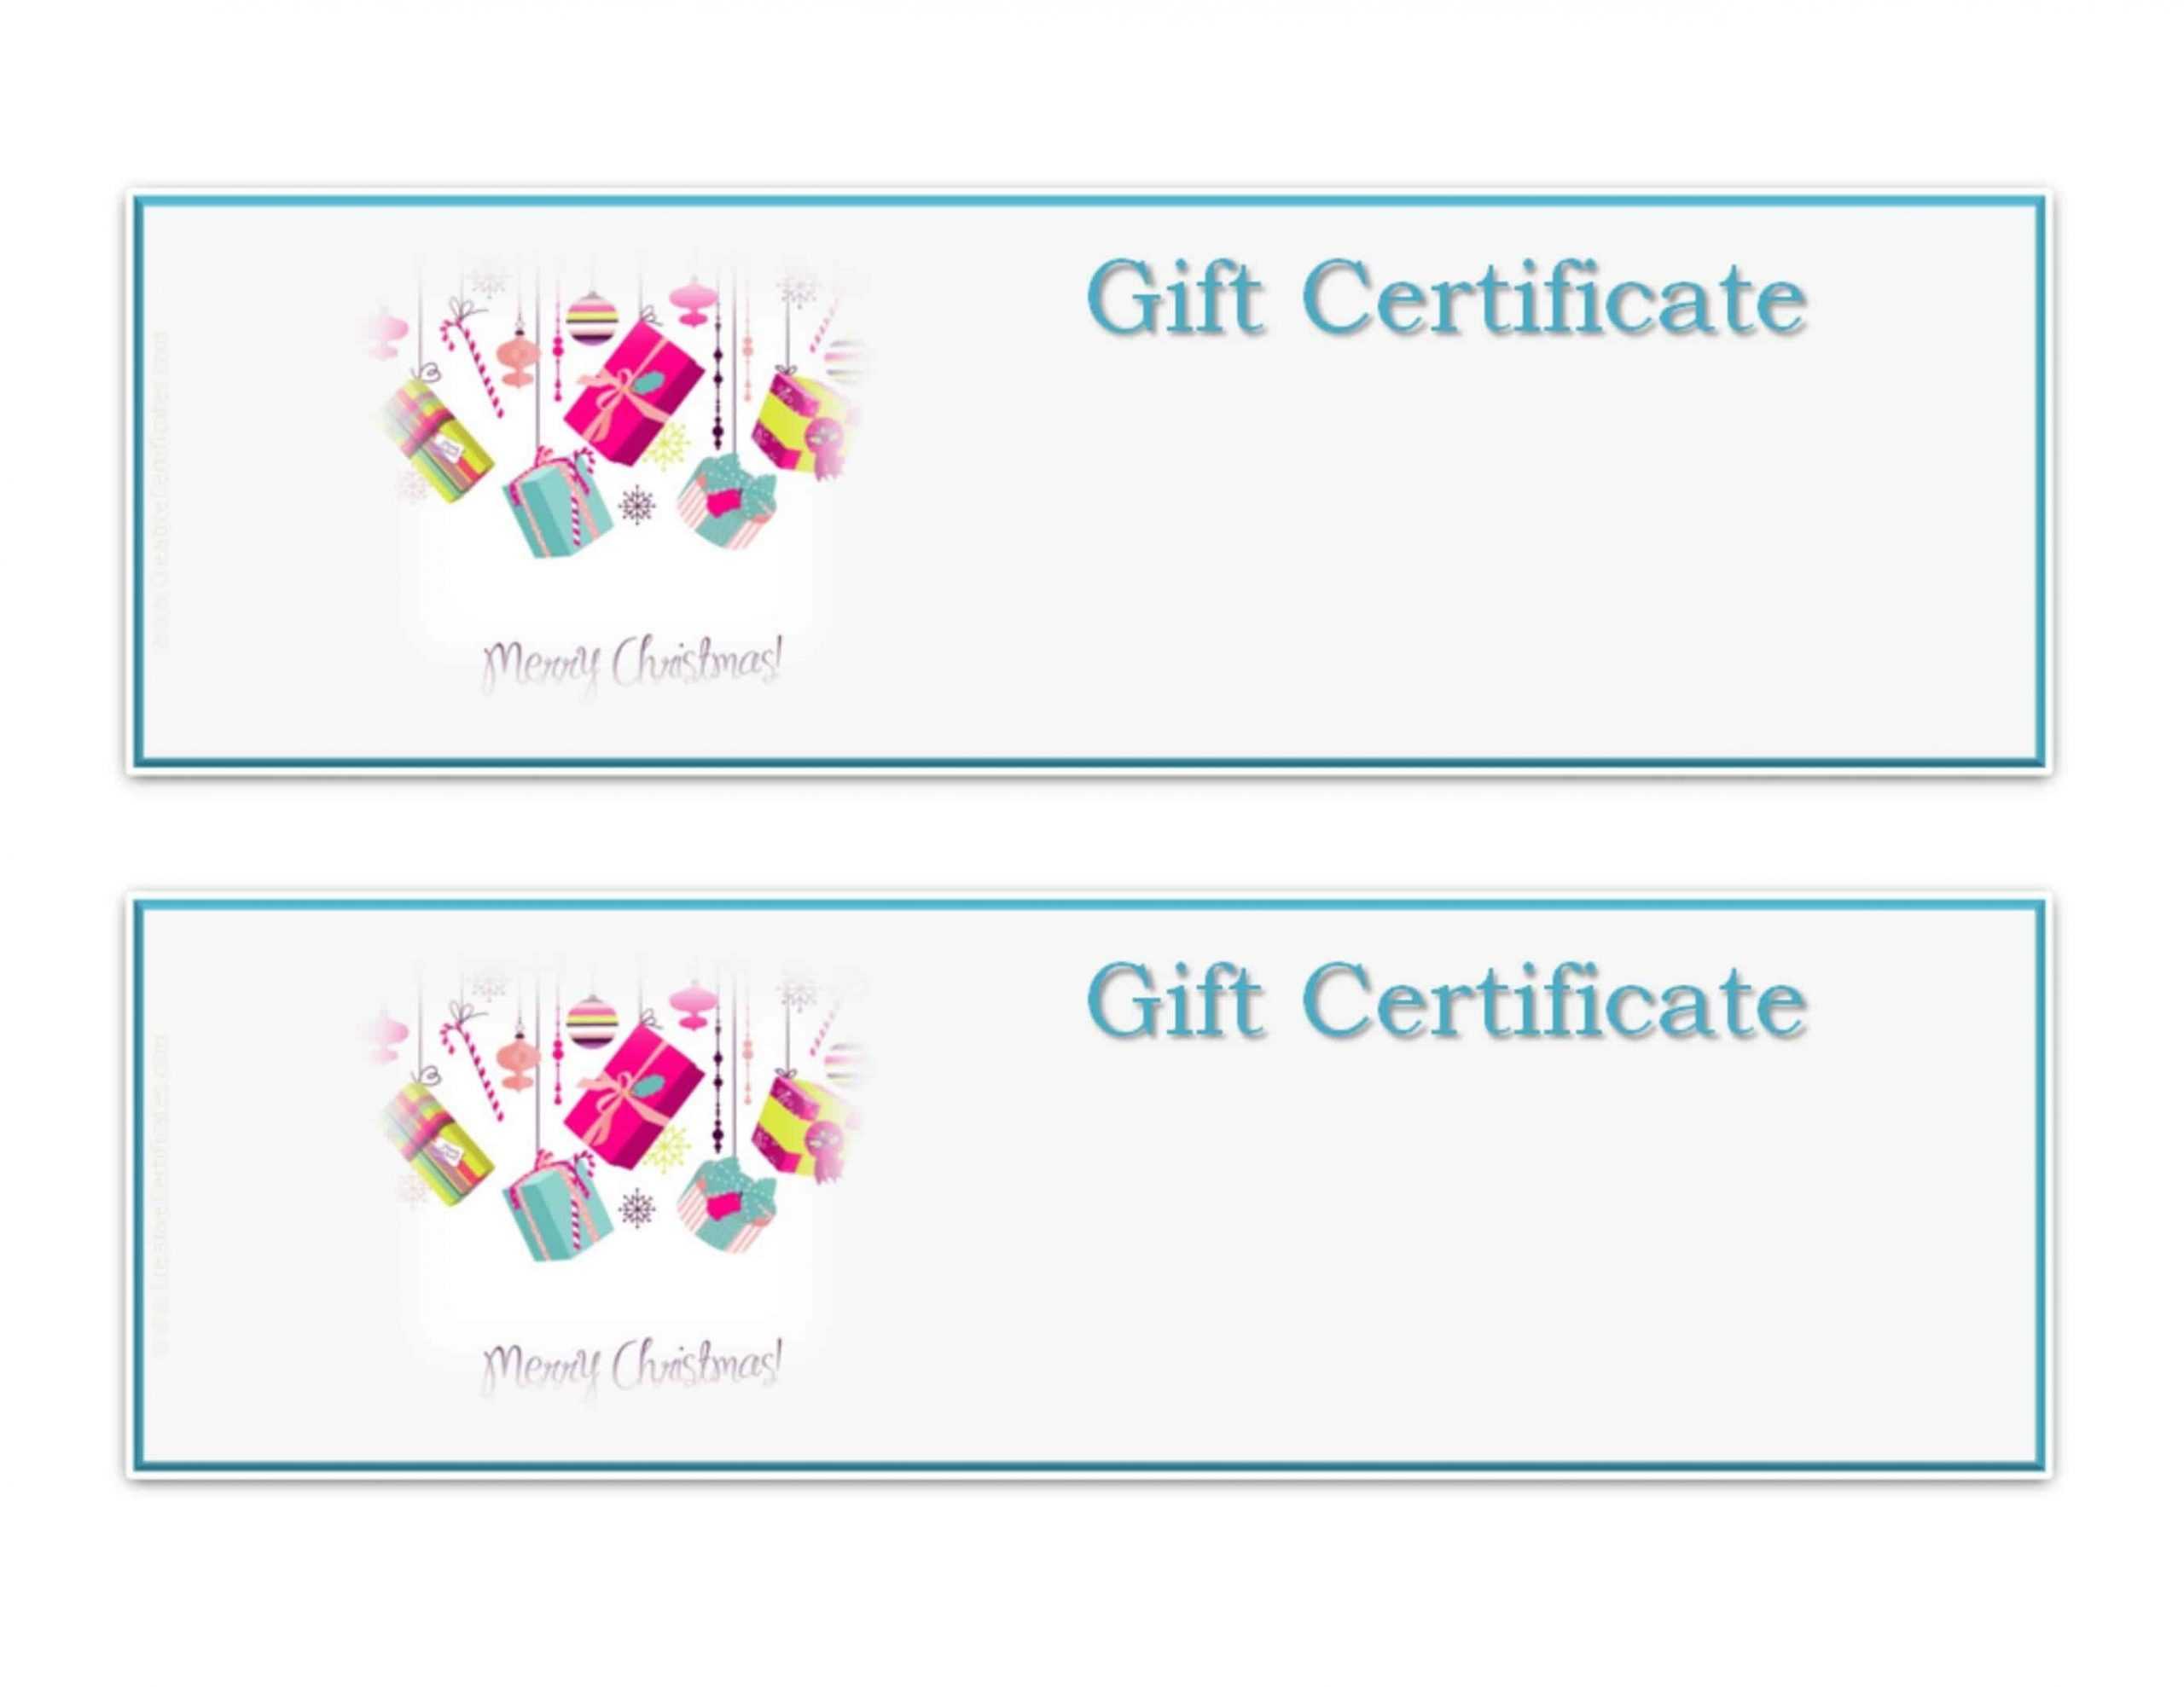 Gift Certificate Templates To Print For Free | 101 Activity Within Merry Christmas Gift Certificate Templates